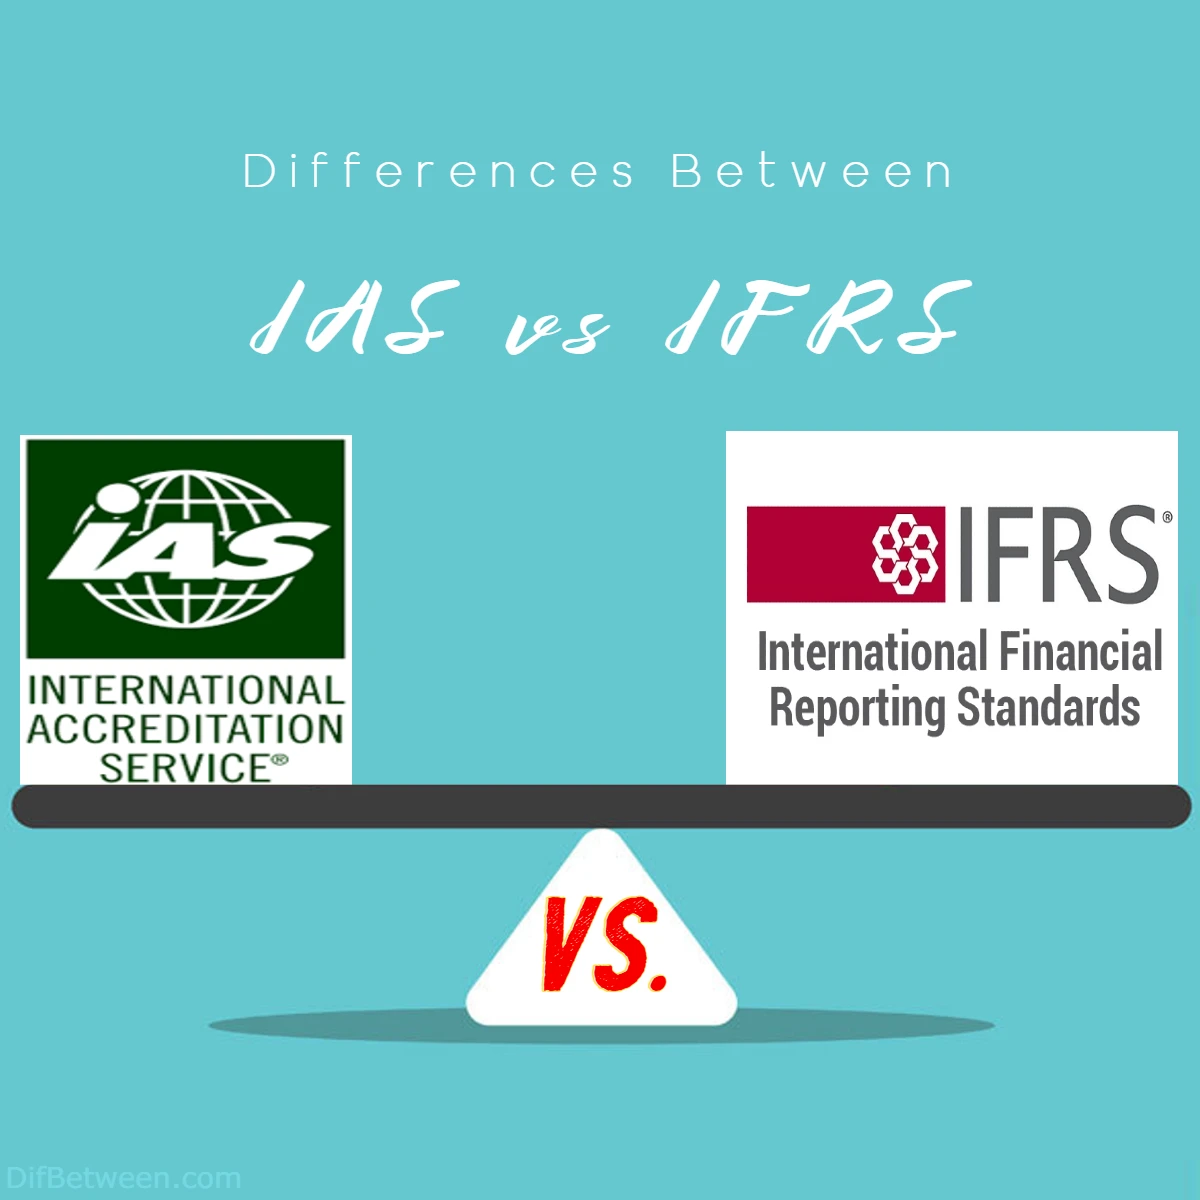 Differences Between IFRS and IAS